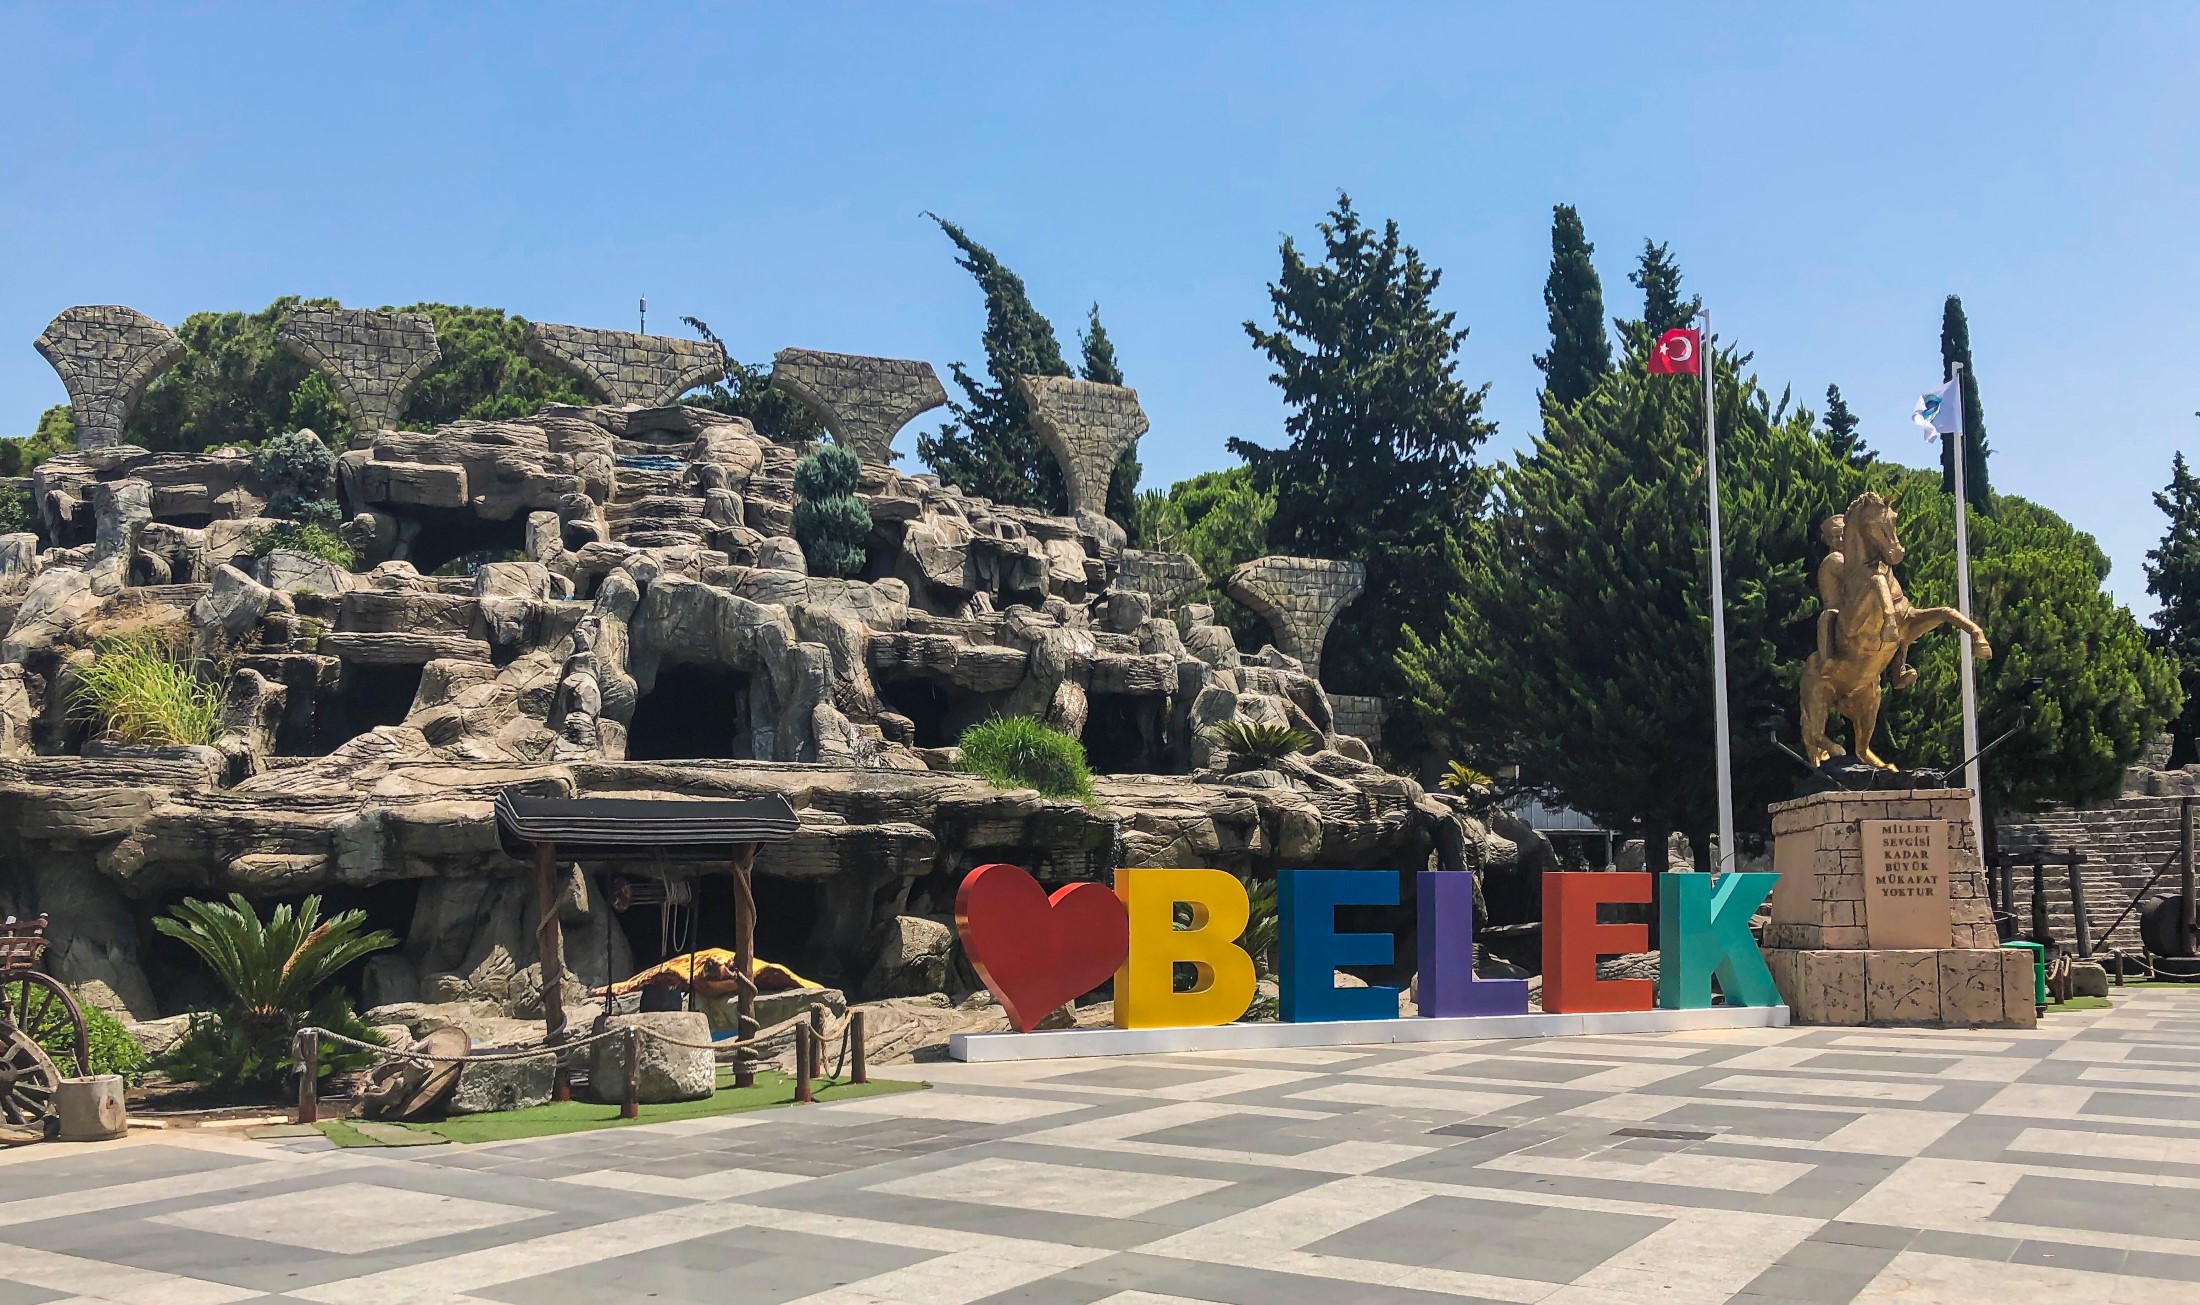 Colorful sign in the city center of Belek, Antalya, Turkey. (July 2019)